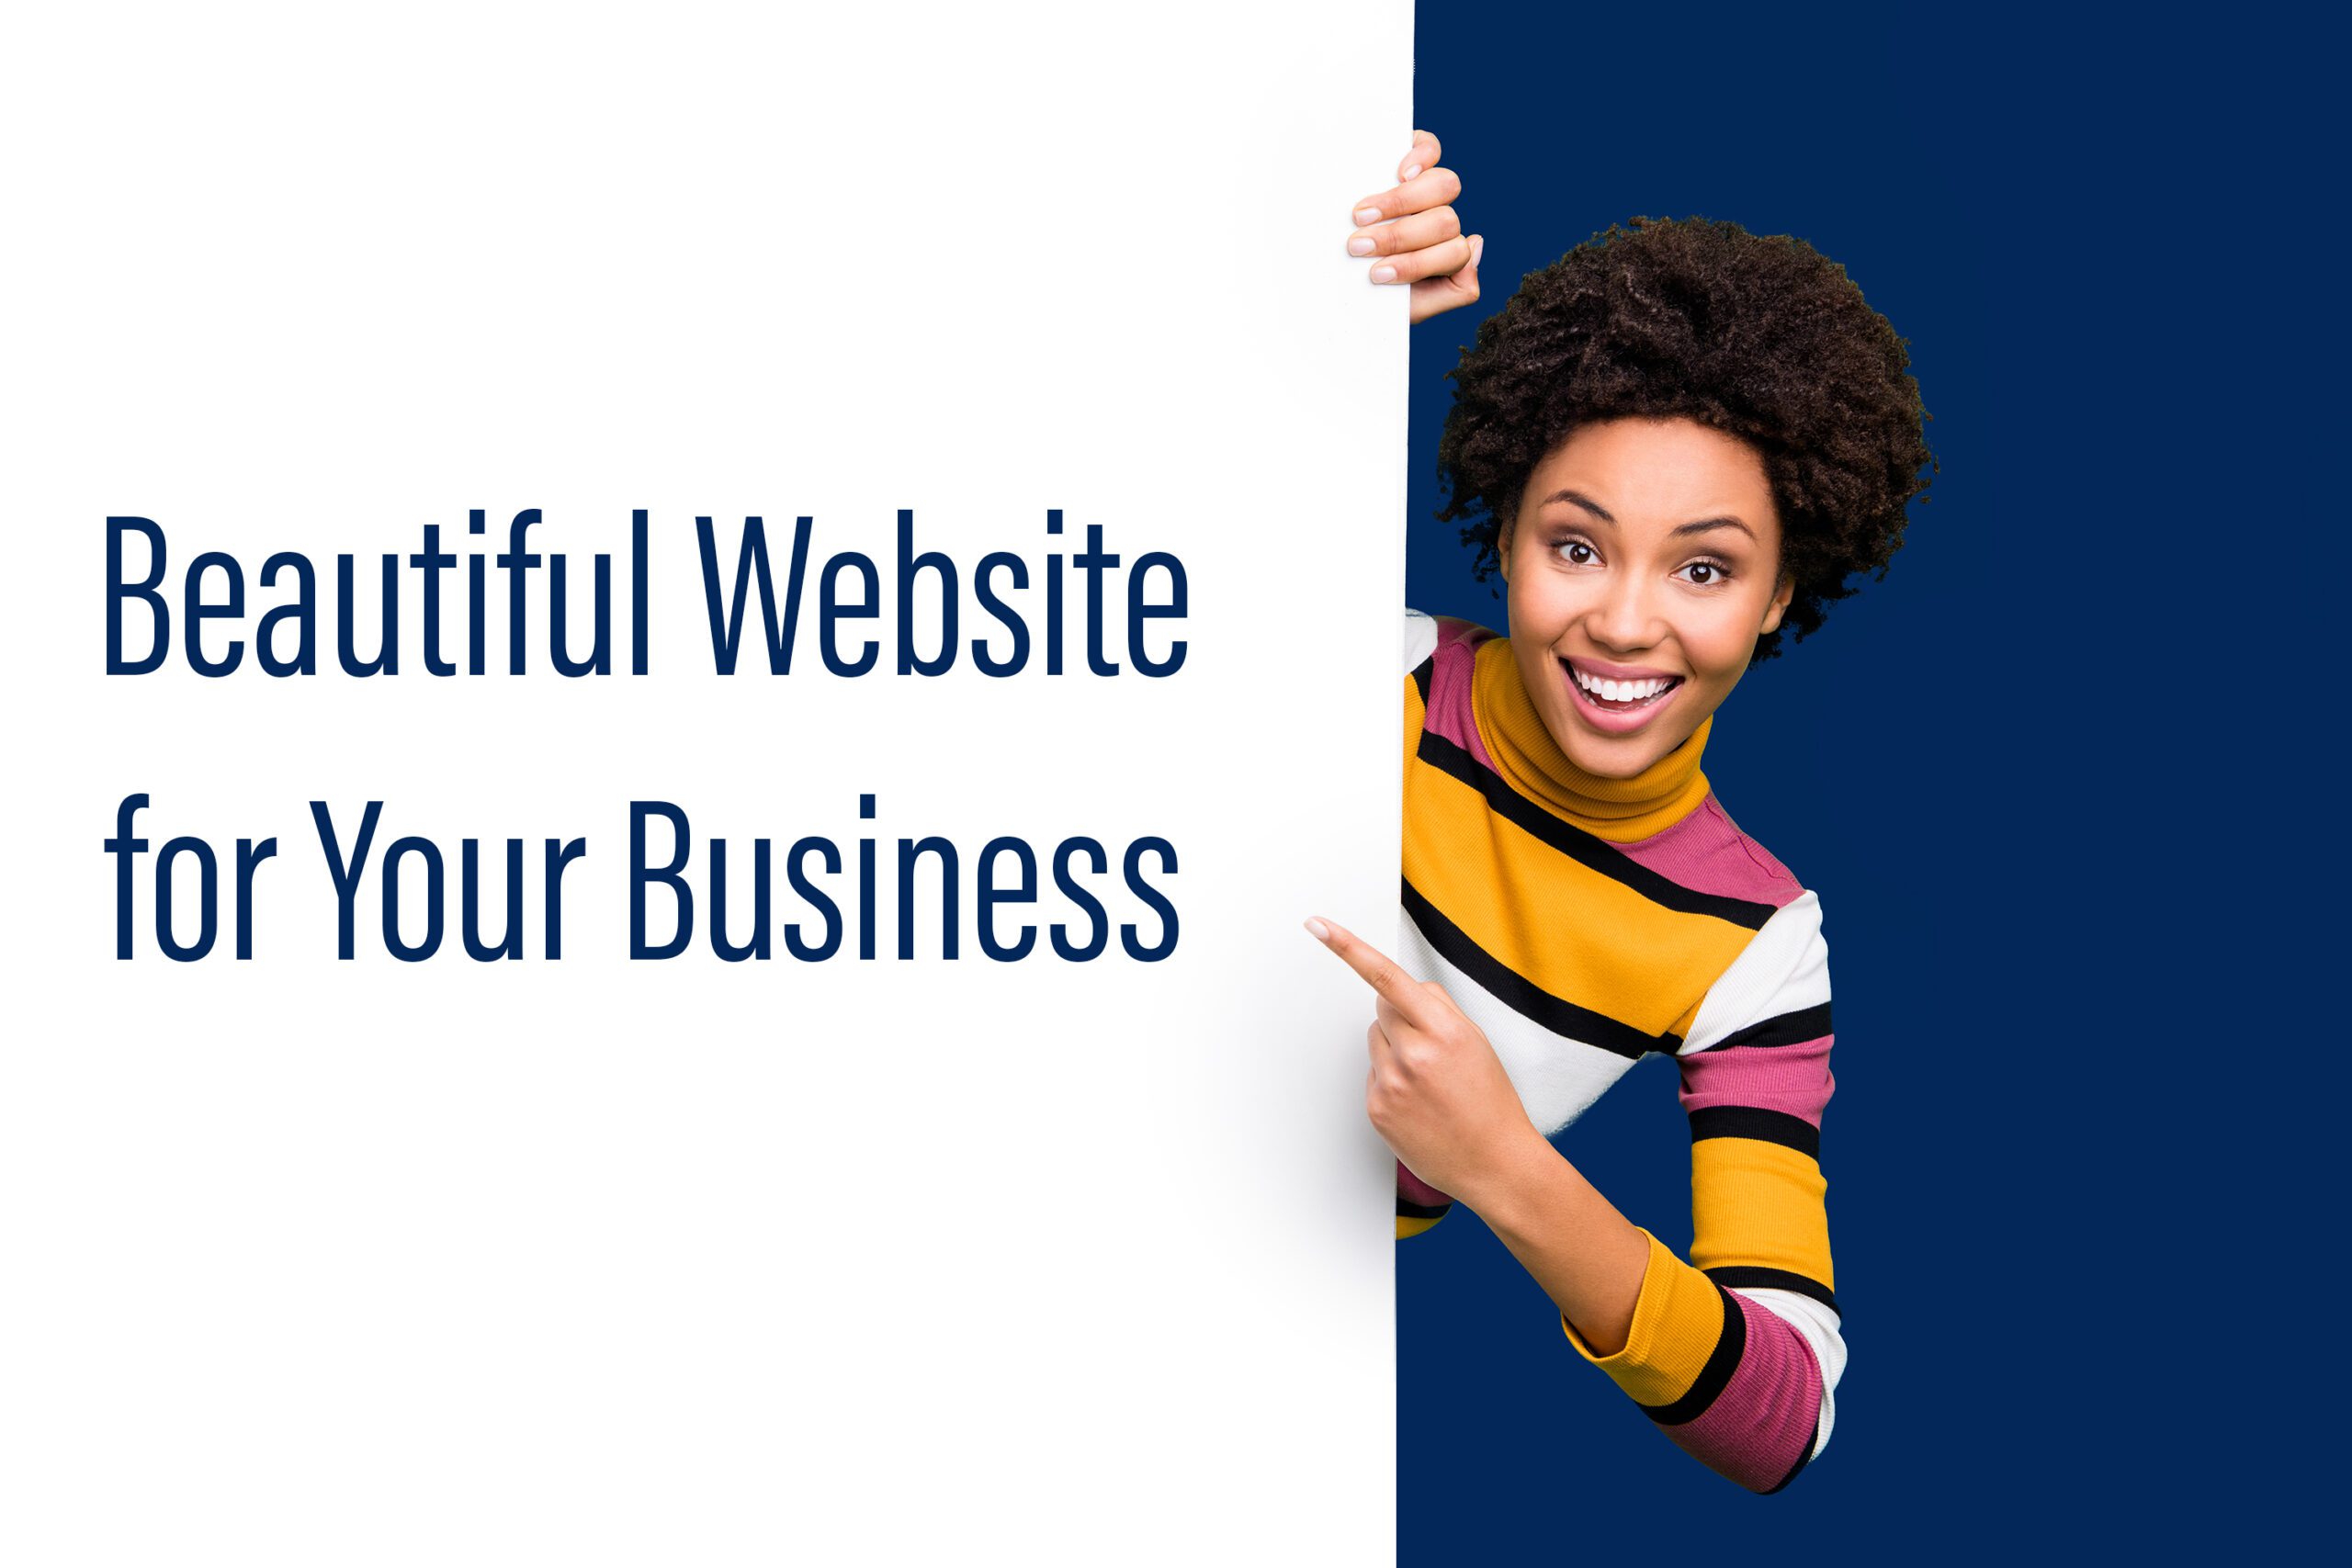 A cheerful woman with curly hair pointing to text "Beautiful Website for Your Business" on a split blue and white background.